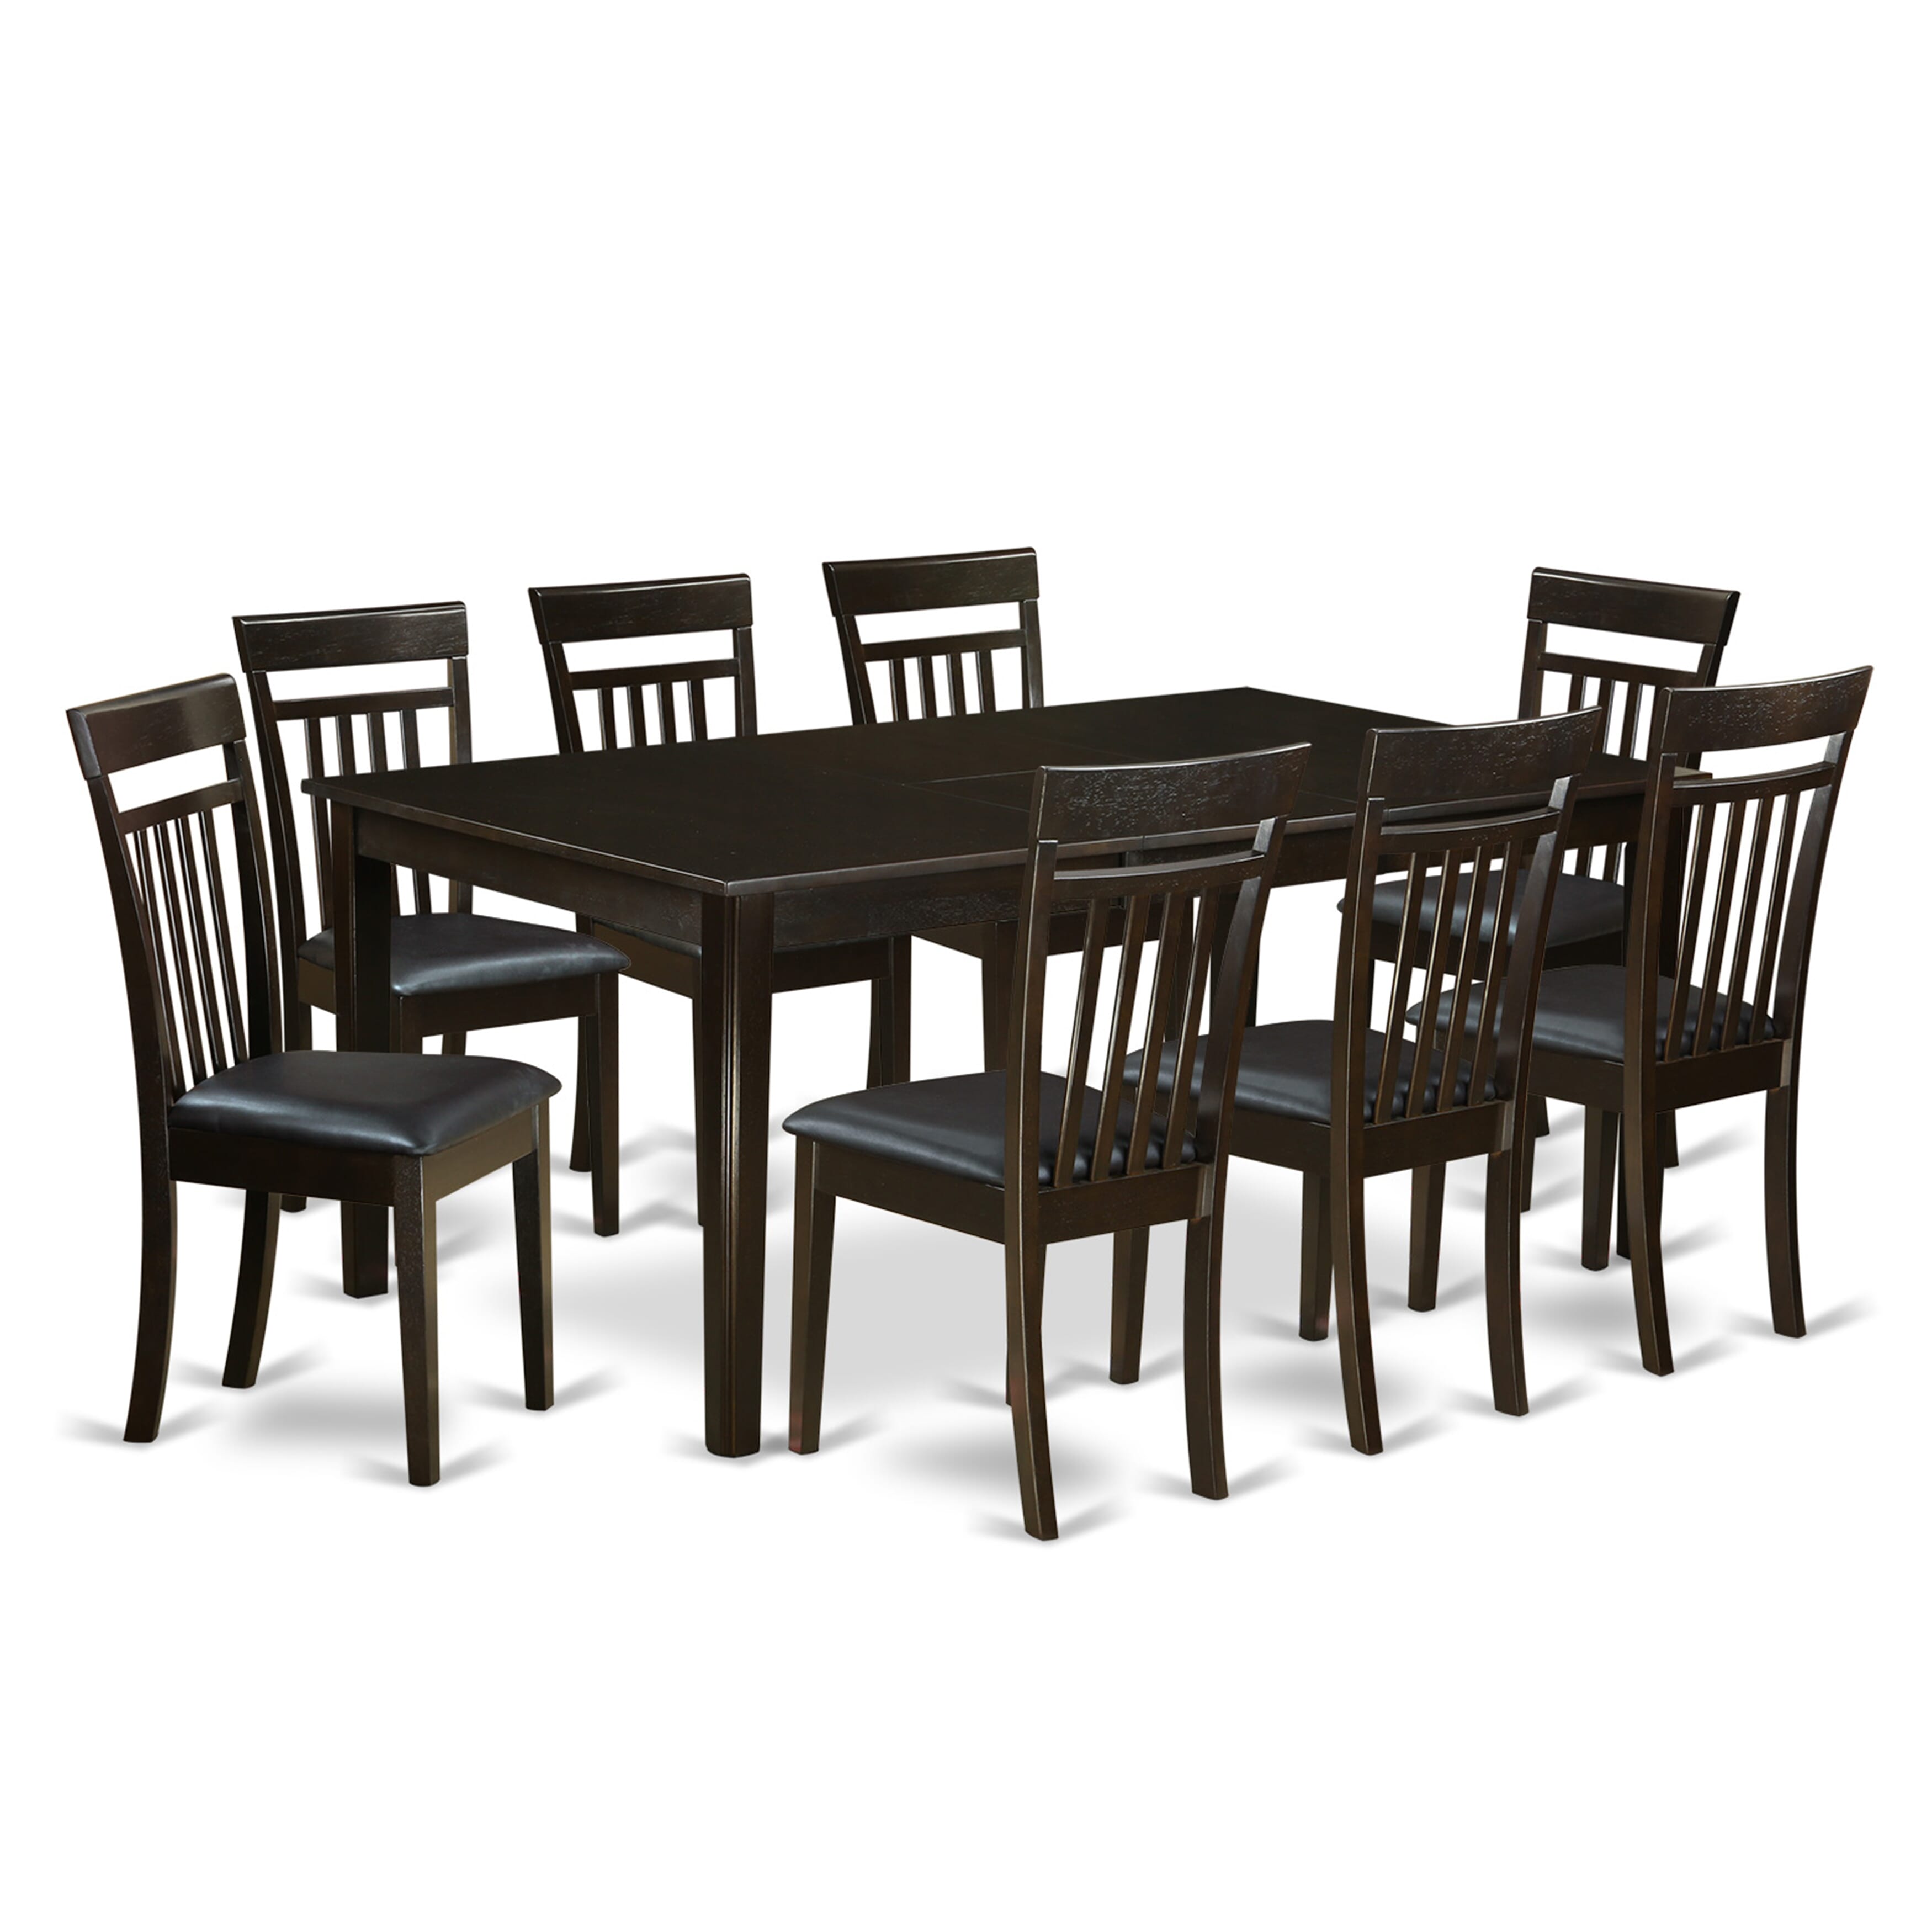 9 Pc Dining Room Cappuccino Table with Leaf & 8 upholstered Chairs Set